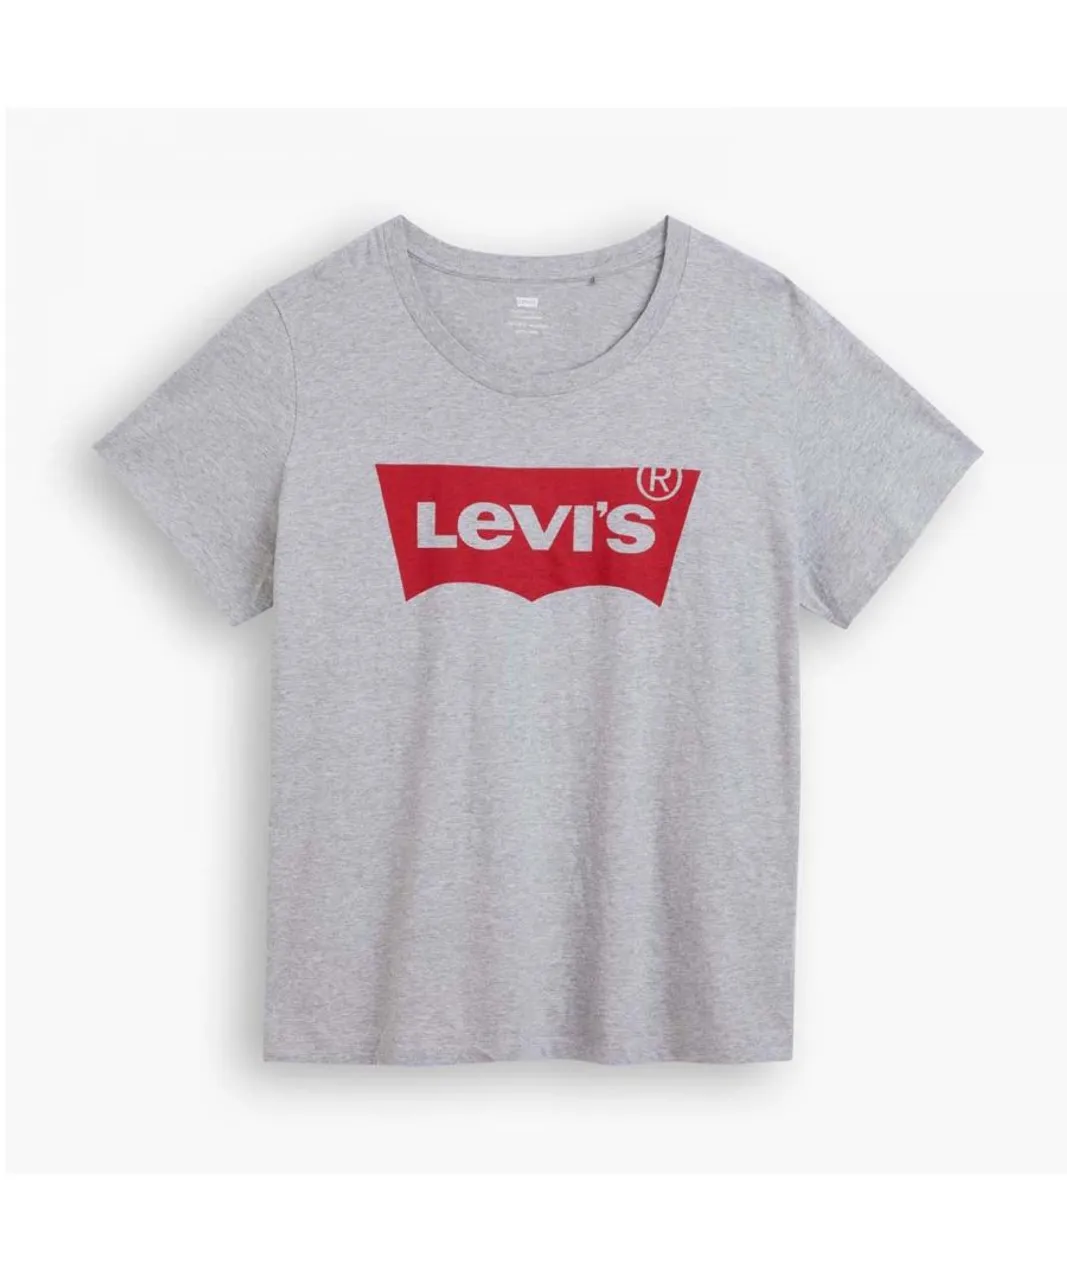 Levi's Womenss Levis Plus Perfect T-Shirt in Grey Heather Cotton